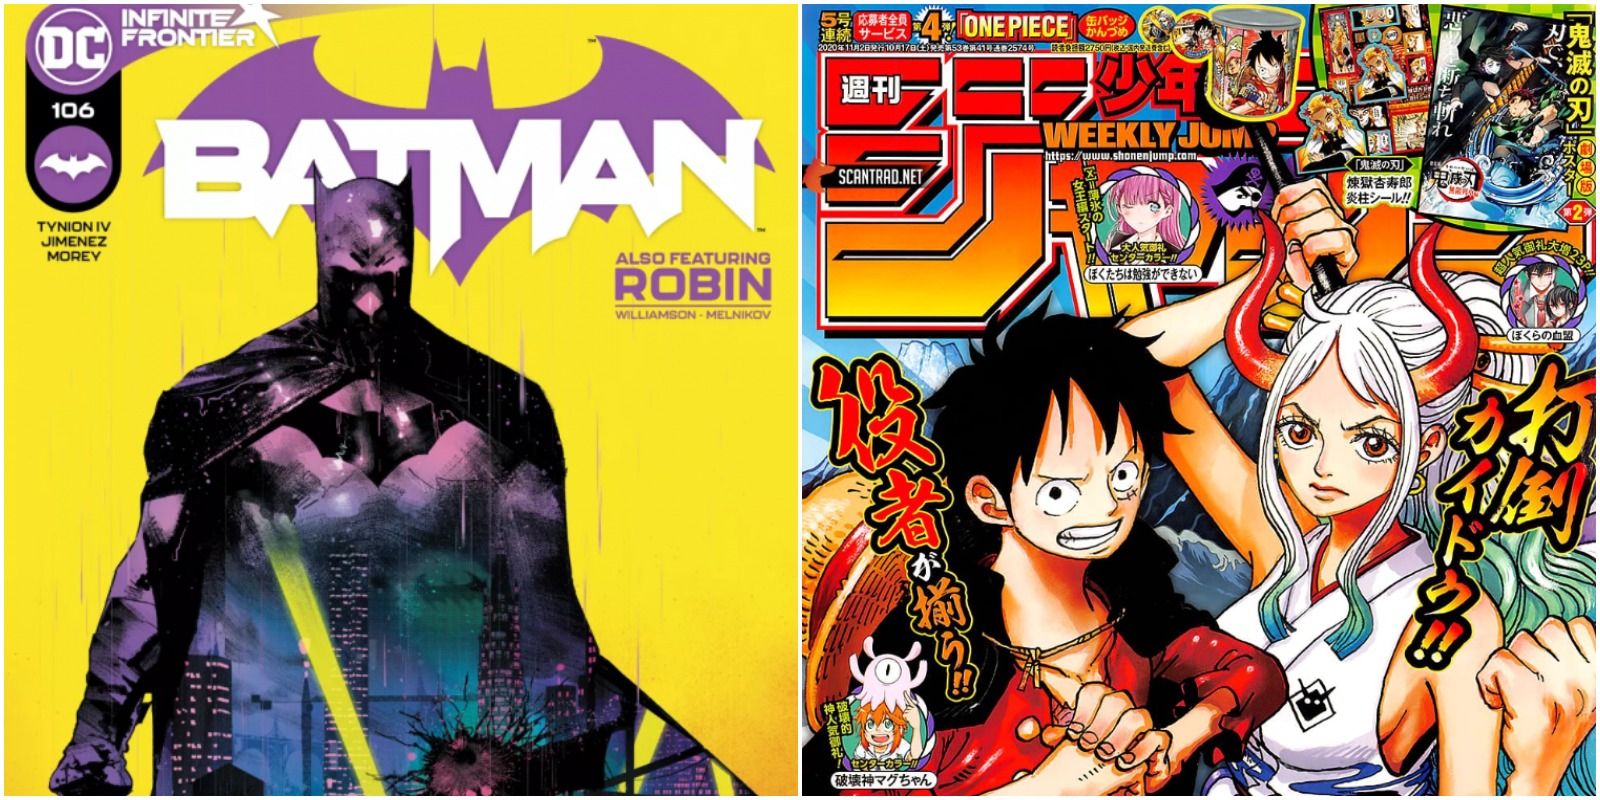 Cover art for Batman #106 and One Piece featured on the cover of Weekly Shonen Jump's October 17, 2020 issue